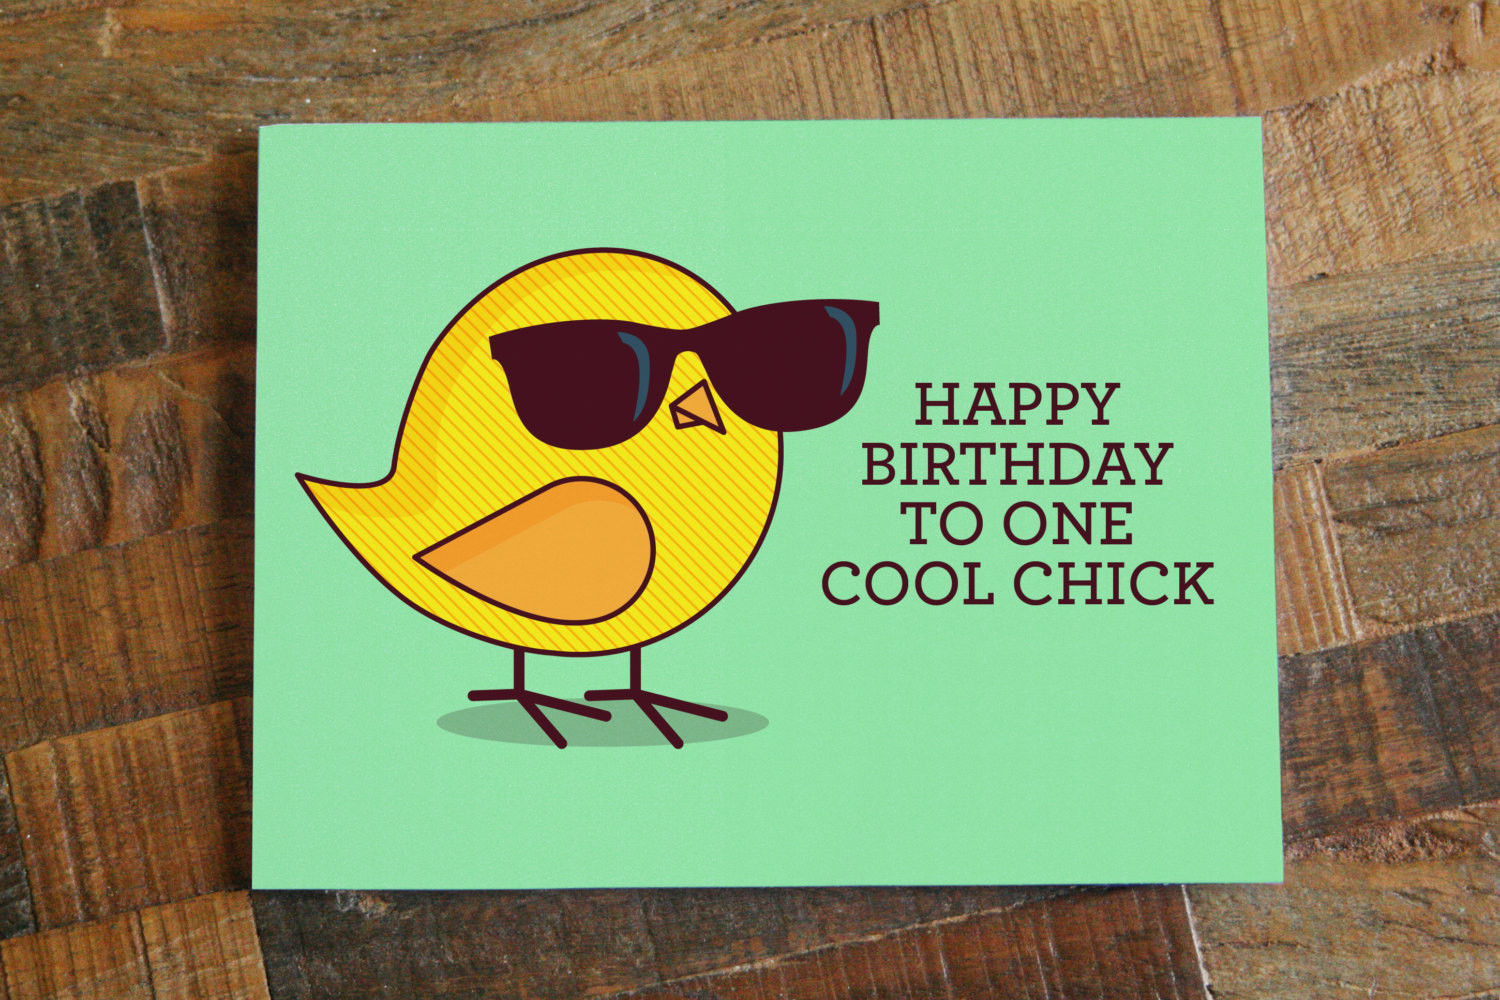 Happy Birthday Funny Cards
 Funny Birthday Card For Her Happy Birthday to e Cool